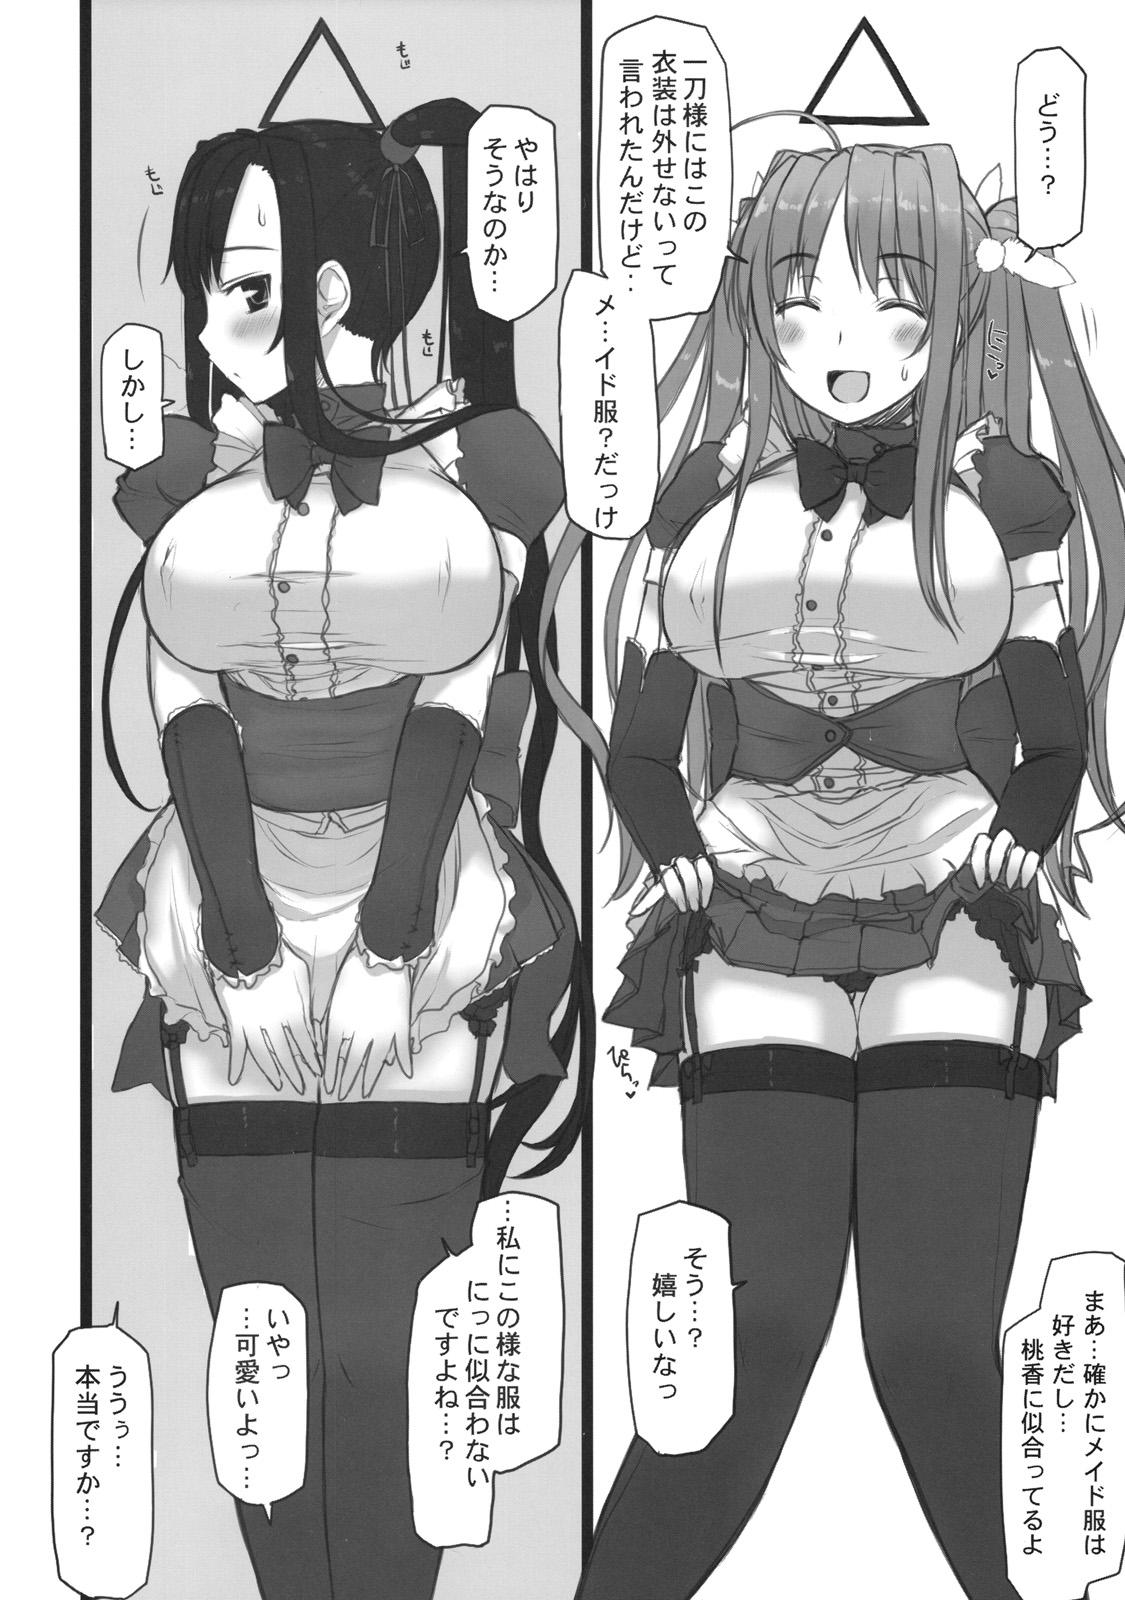 Chica Chichihime Musou - Koihime musou Nudity - Page 11